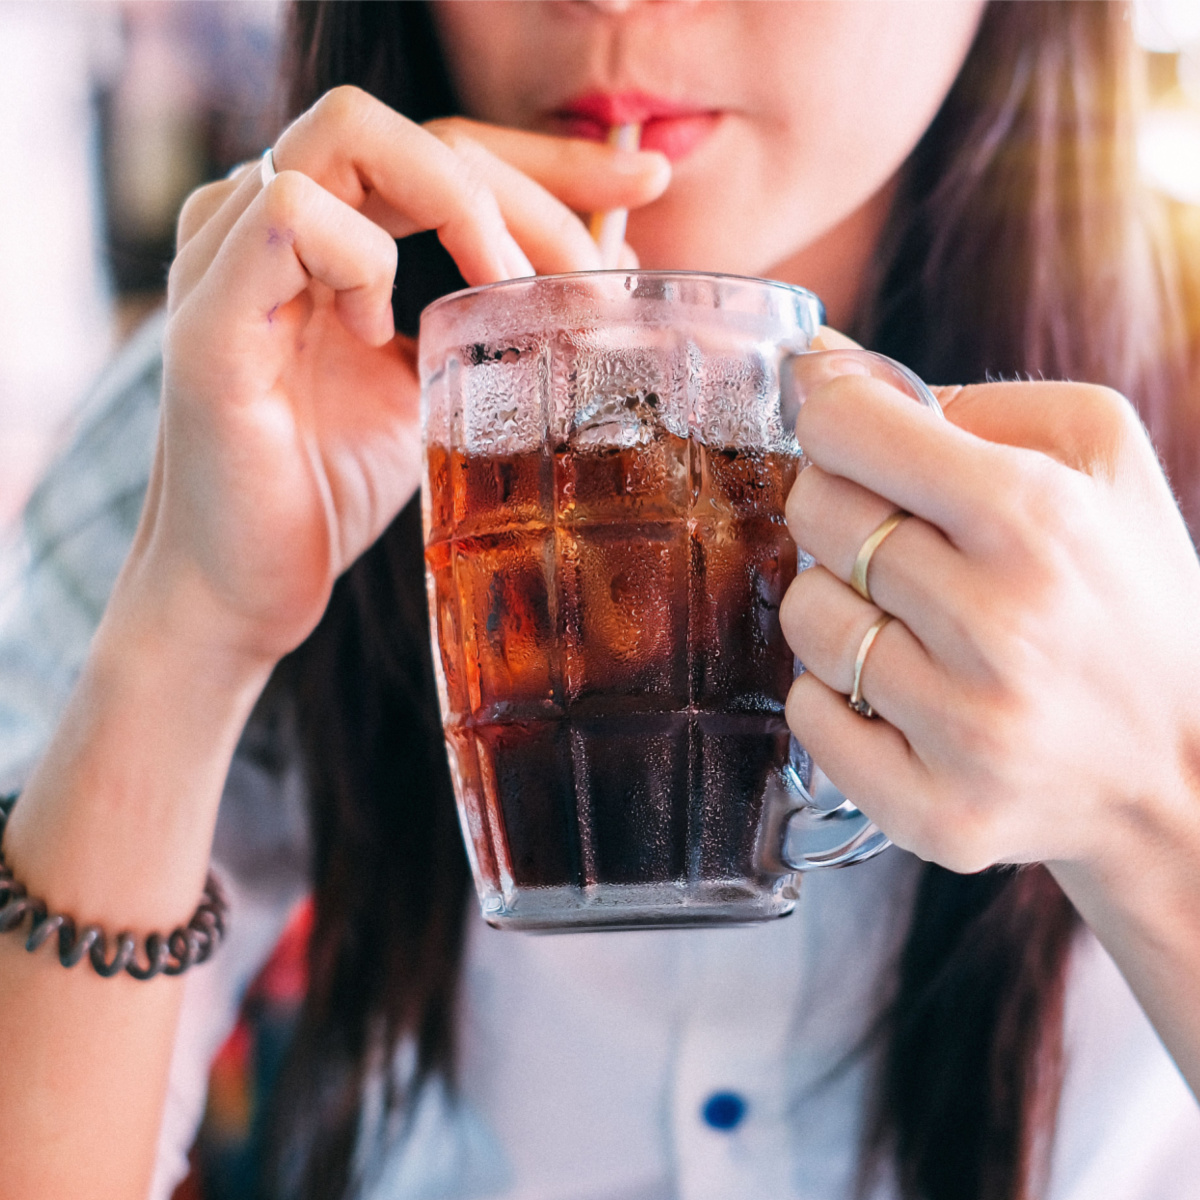 woman drinking soda bubbly brown beverage glass striped straw